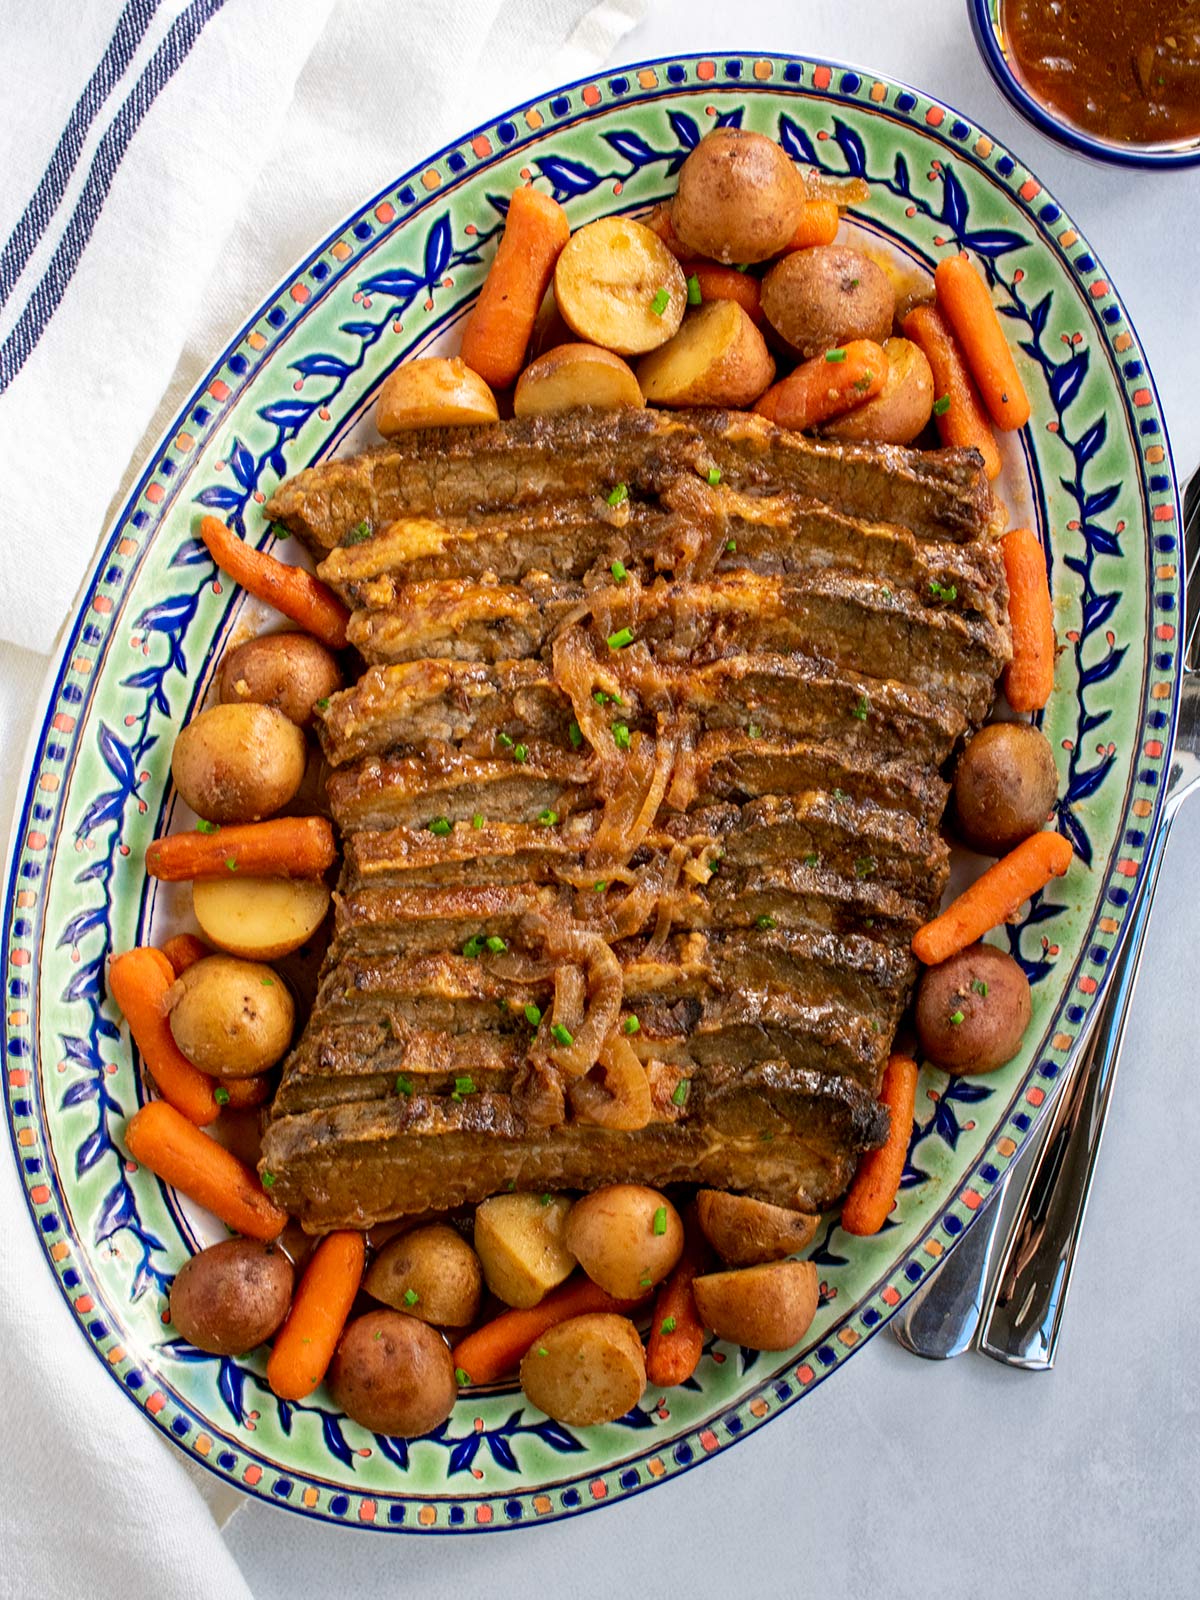 A platter of brisket with potatoes and carrots surrounding the meat and some gravy in a small bowl on the side to introduce the brisket section of a post on Rosh Hashanah food ideas.